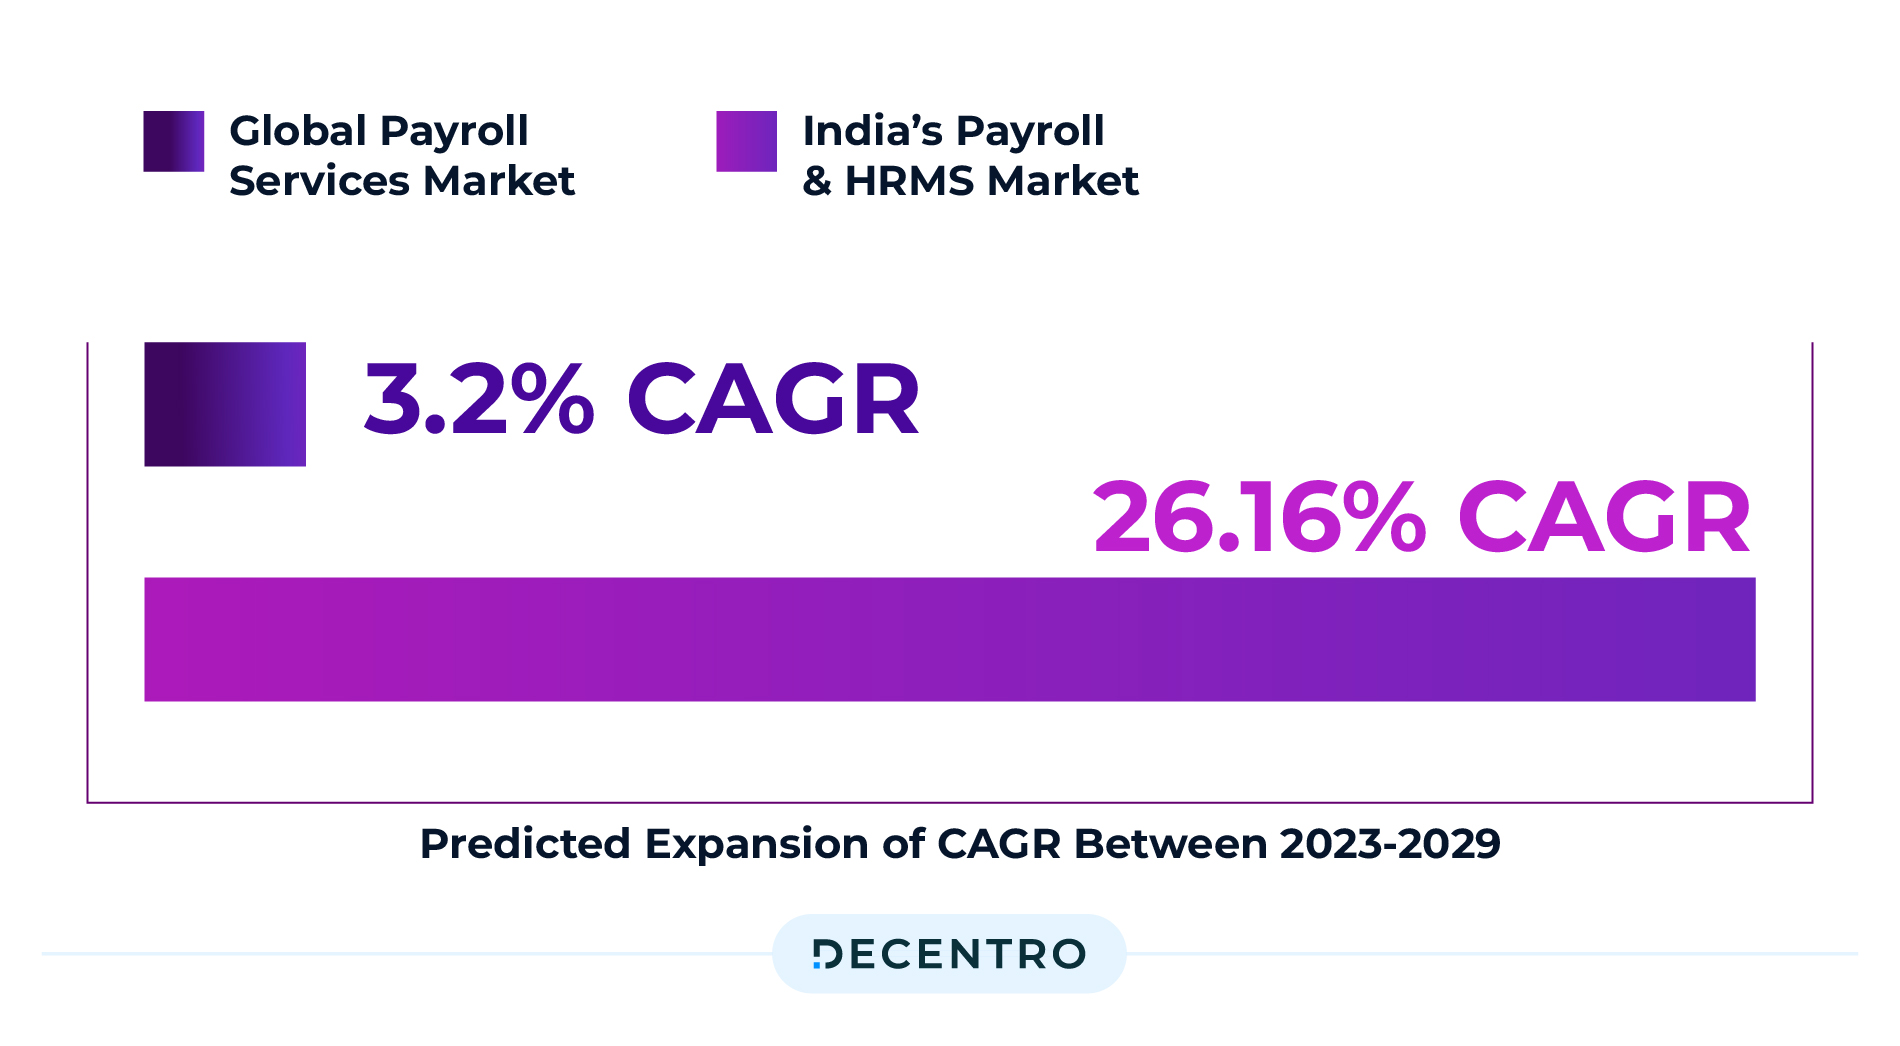 Predicted expansion of CAGR between India's Payroll Market and Global Market